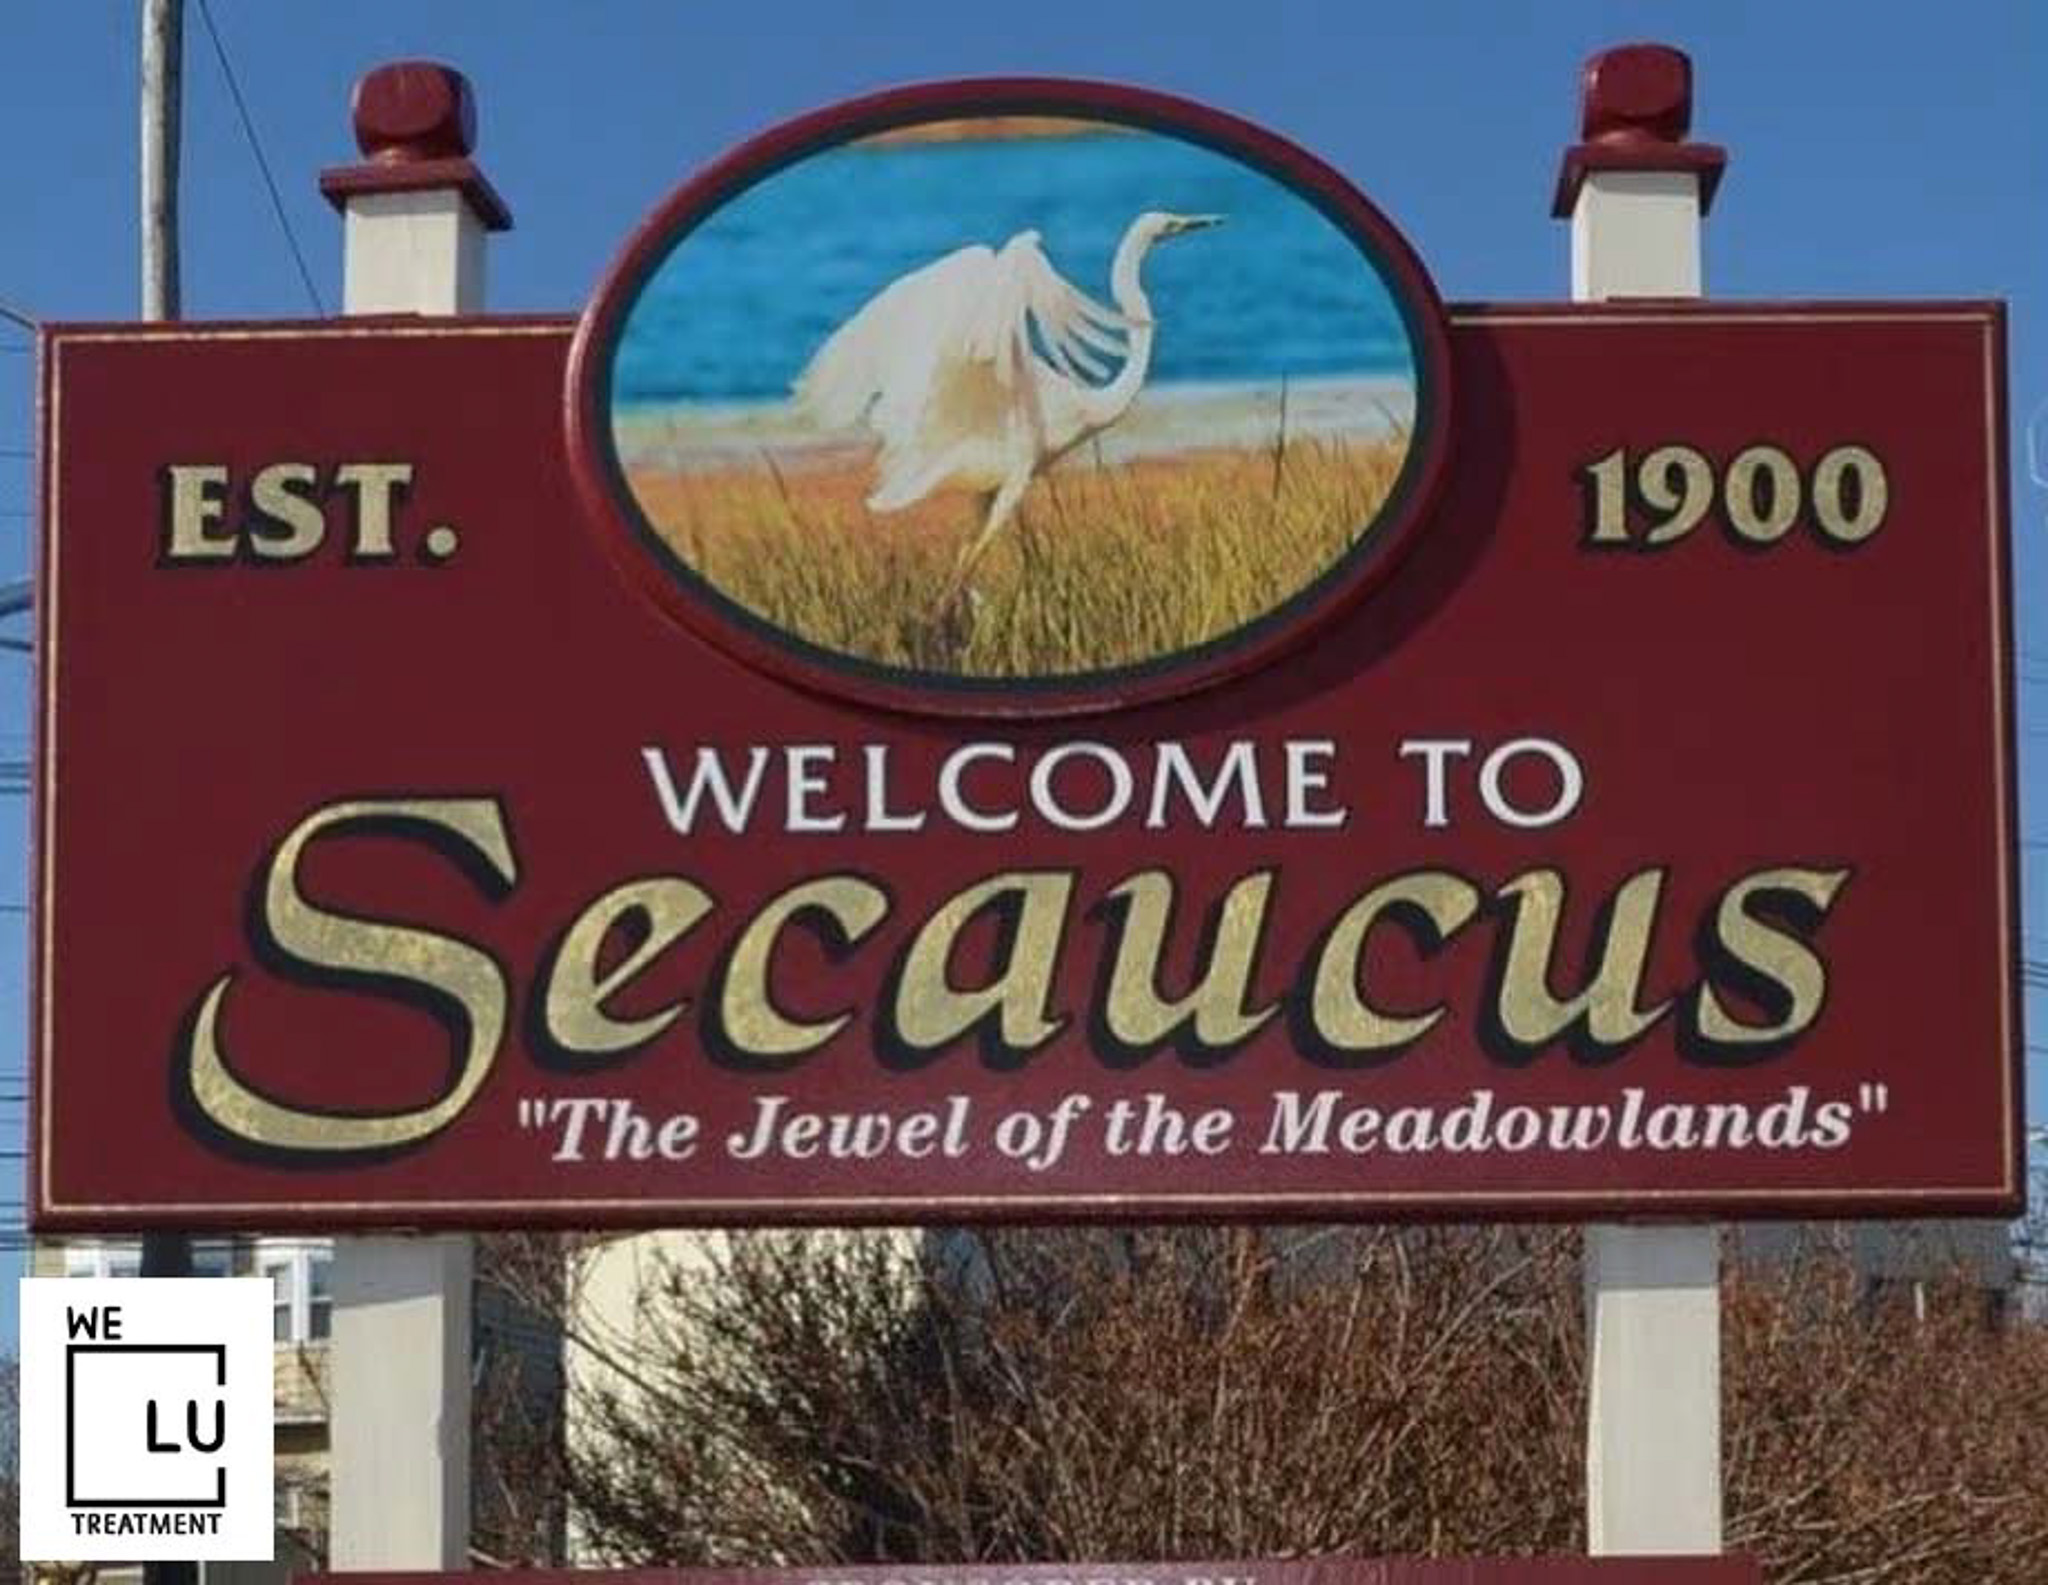 There are numerous choices for inpatient drug treatment centers in Secaucus, but not all are officially accredited, like We Level Up.